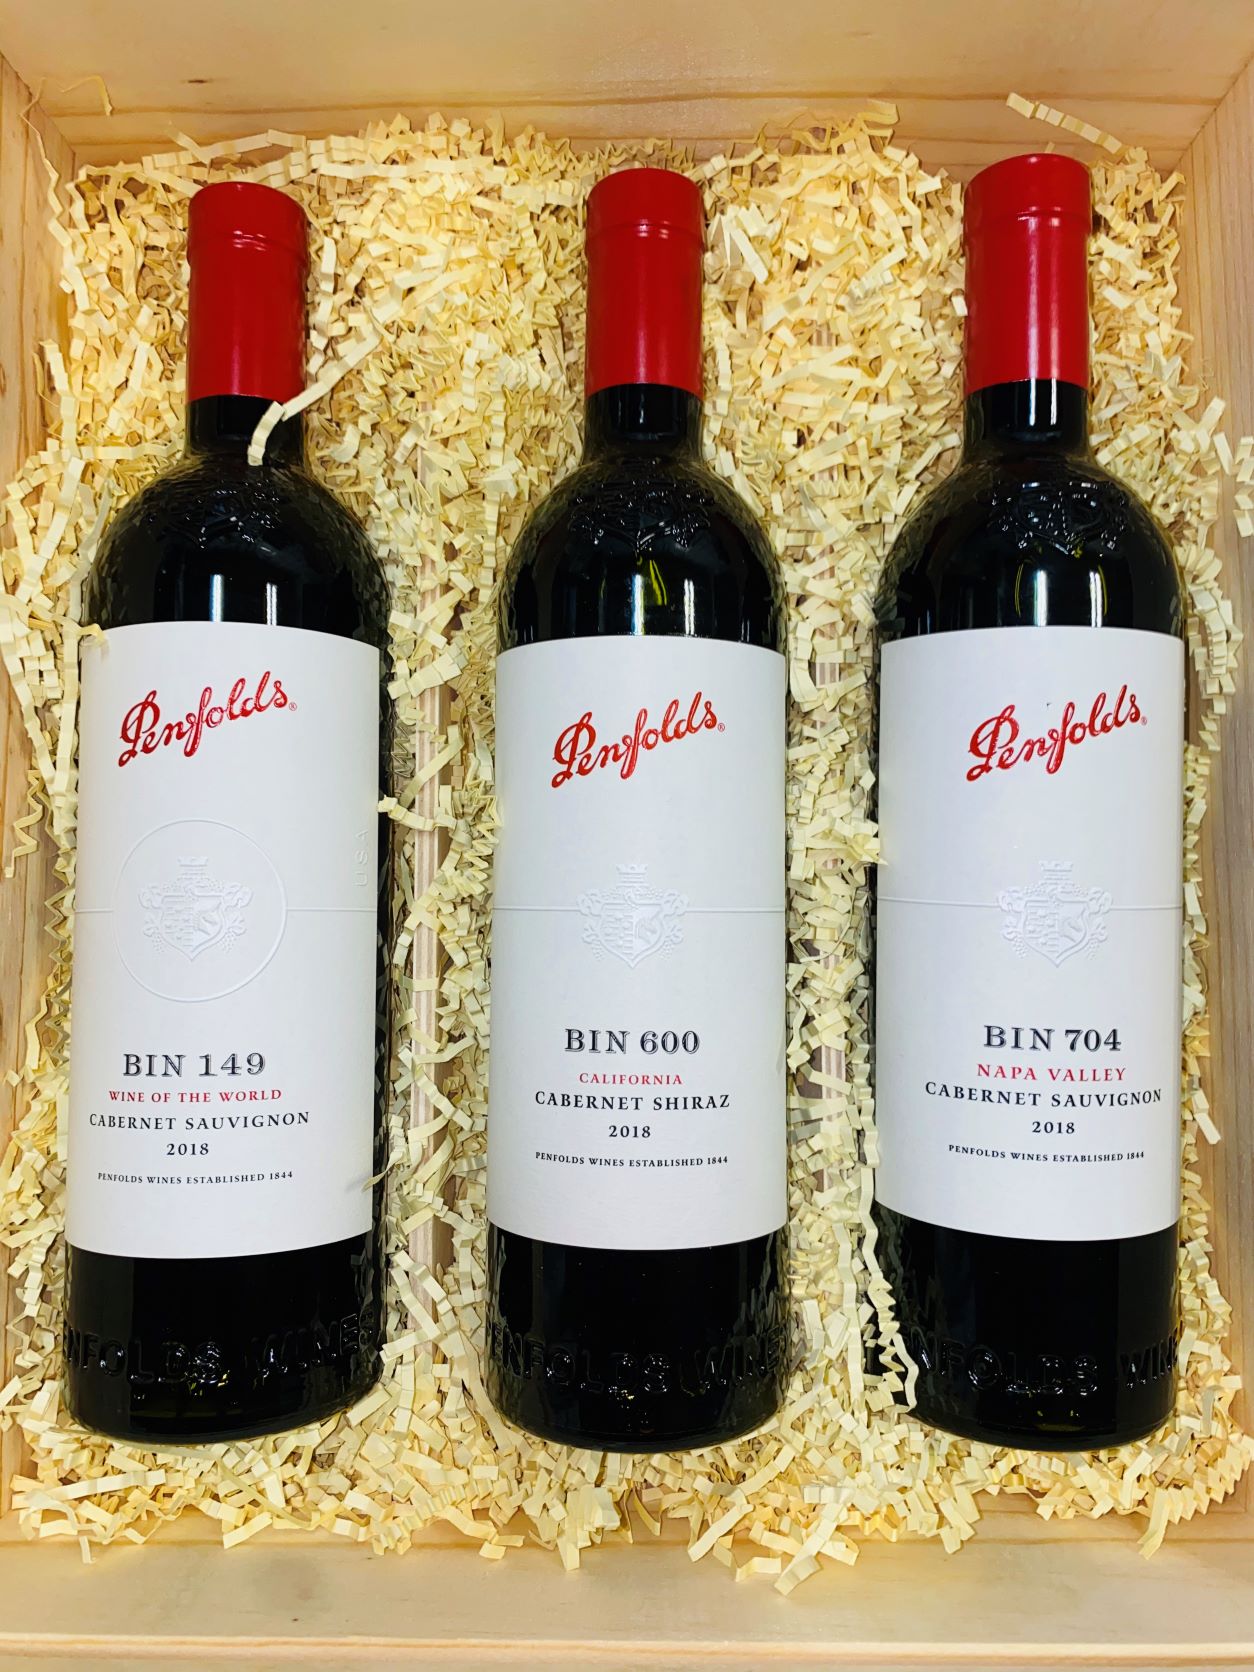 Penfolds New California Collaboration Three Pack #22C8 - click image for full description